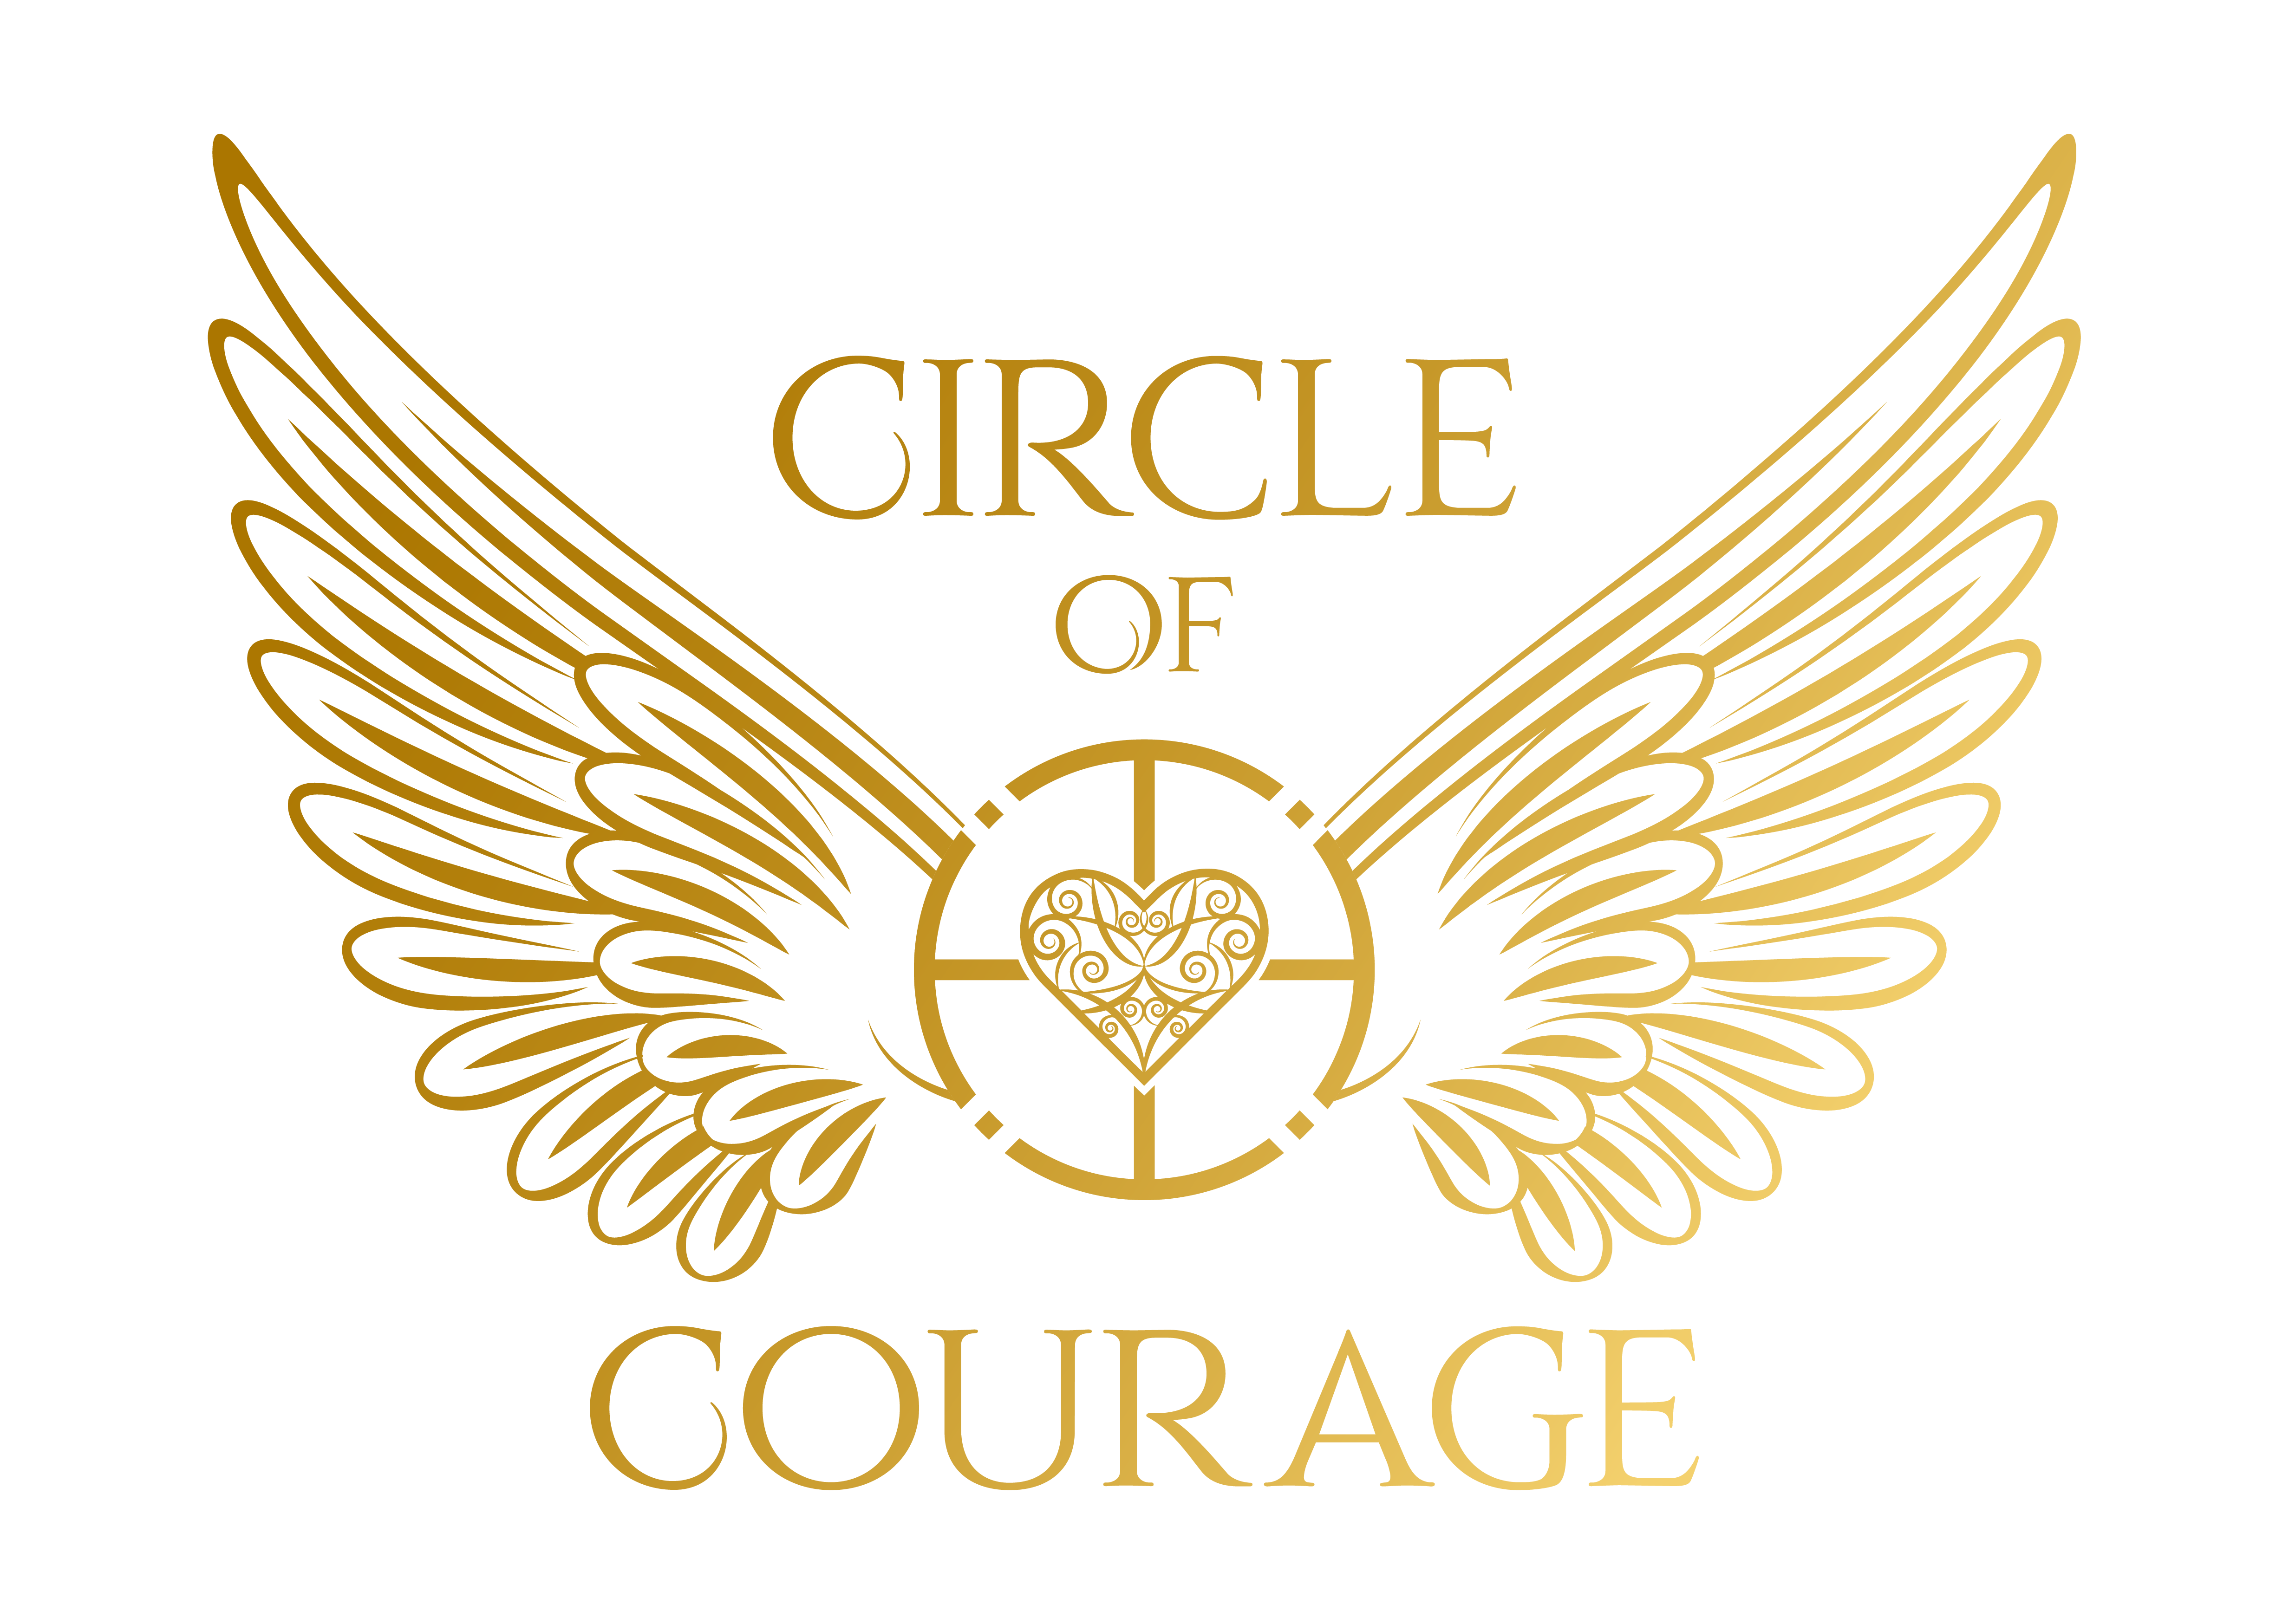 Circle of Courage Mon Sep 18th at Gang Gang Gallery, Blue Mountains 5 - 7pm